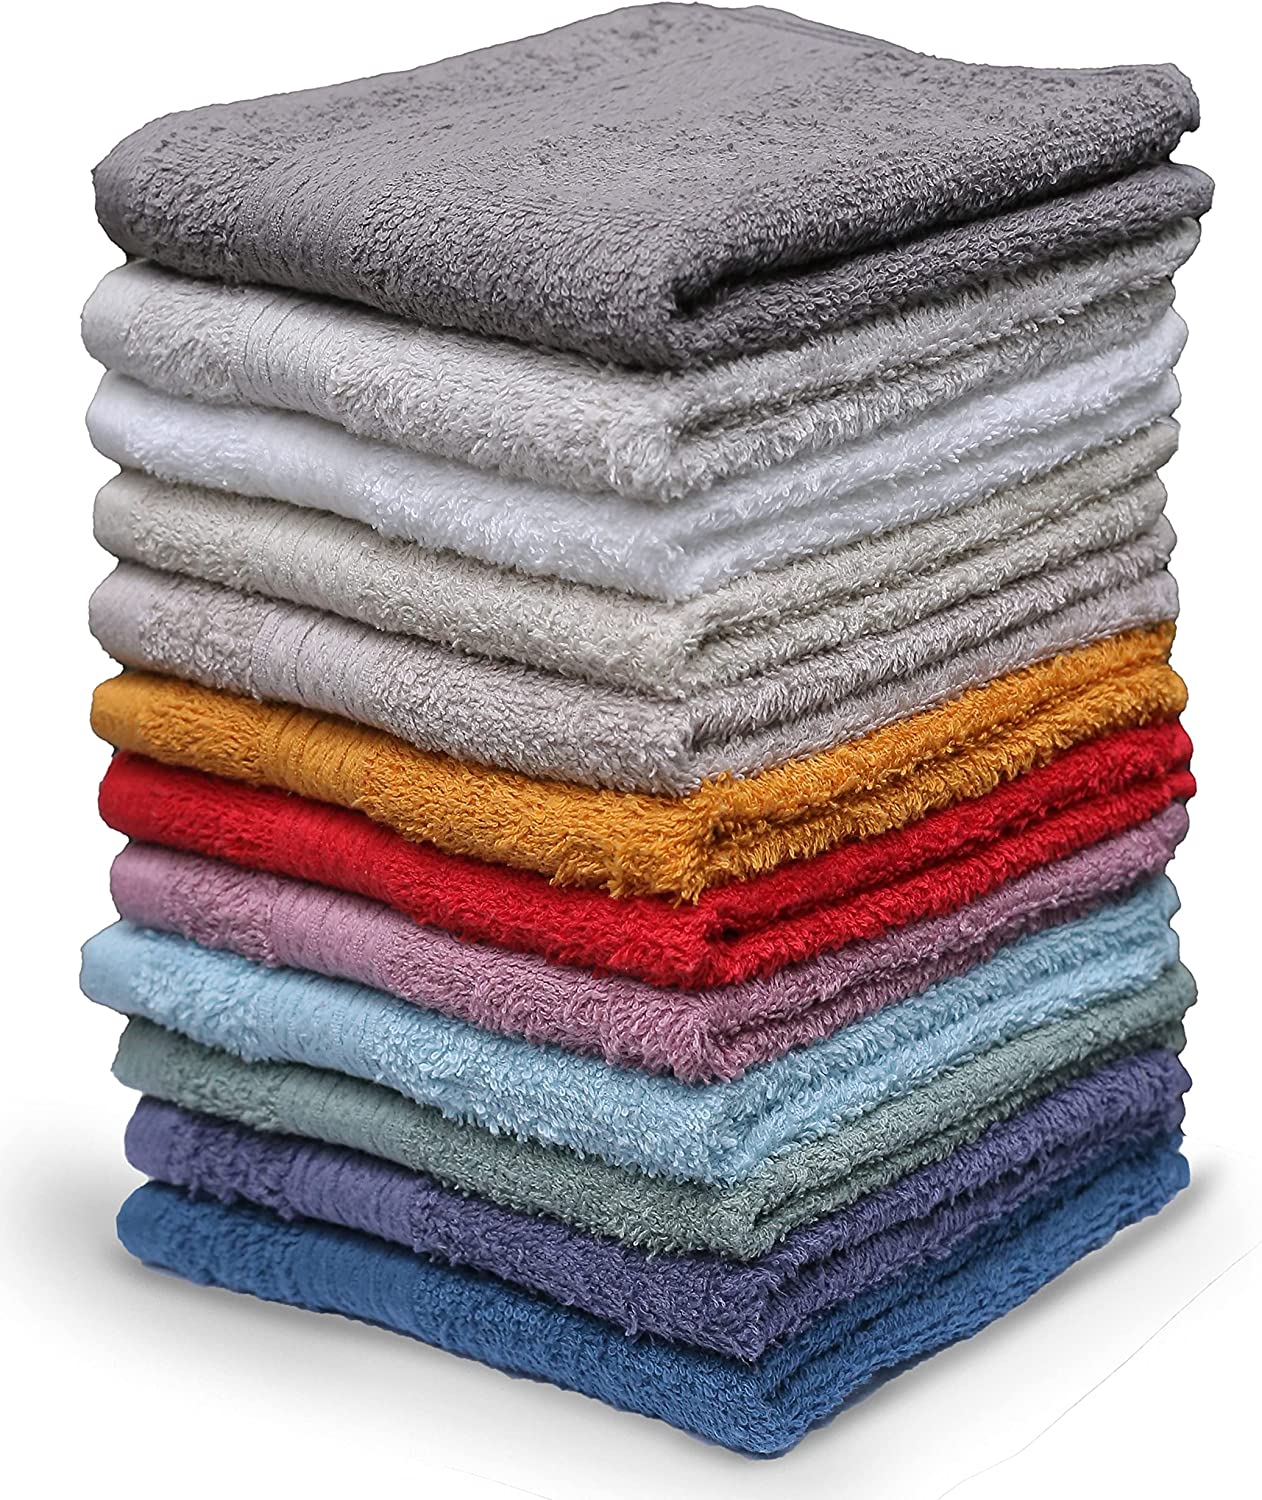 COTTON CRAFT Amazing Kitchen Towels - 4 Pack Reusable Terry Towels - 100%  Cotton European Waffle Pantry Bar Cleaning Cloth Towel - Quick Dry Low Lint